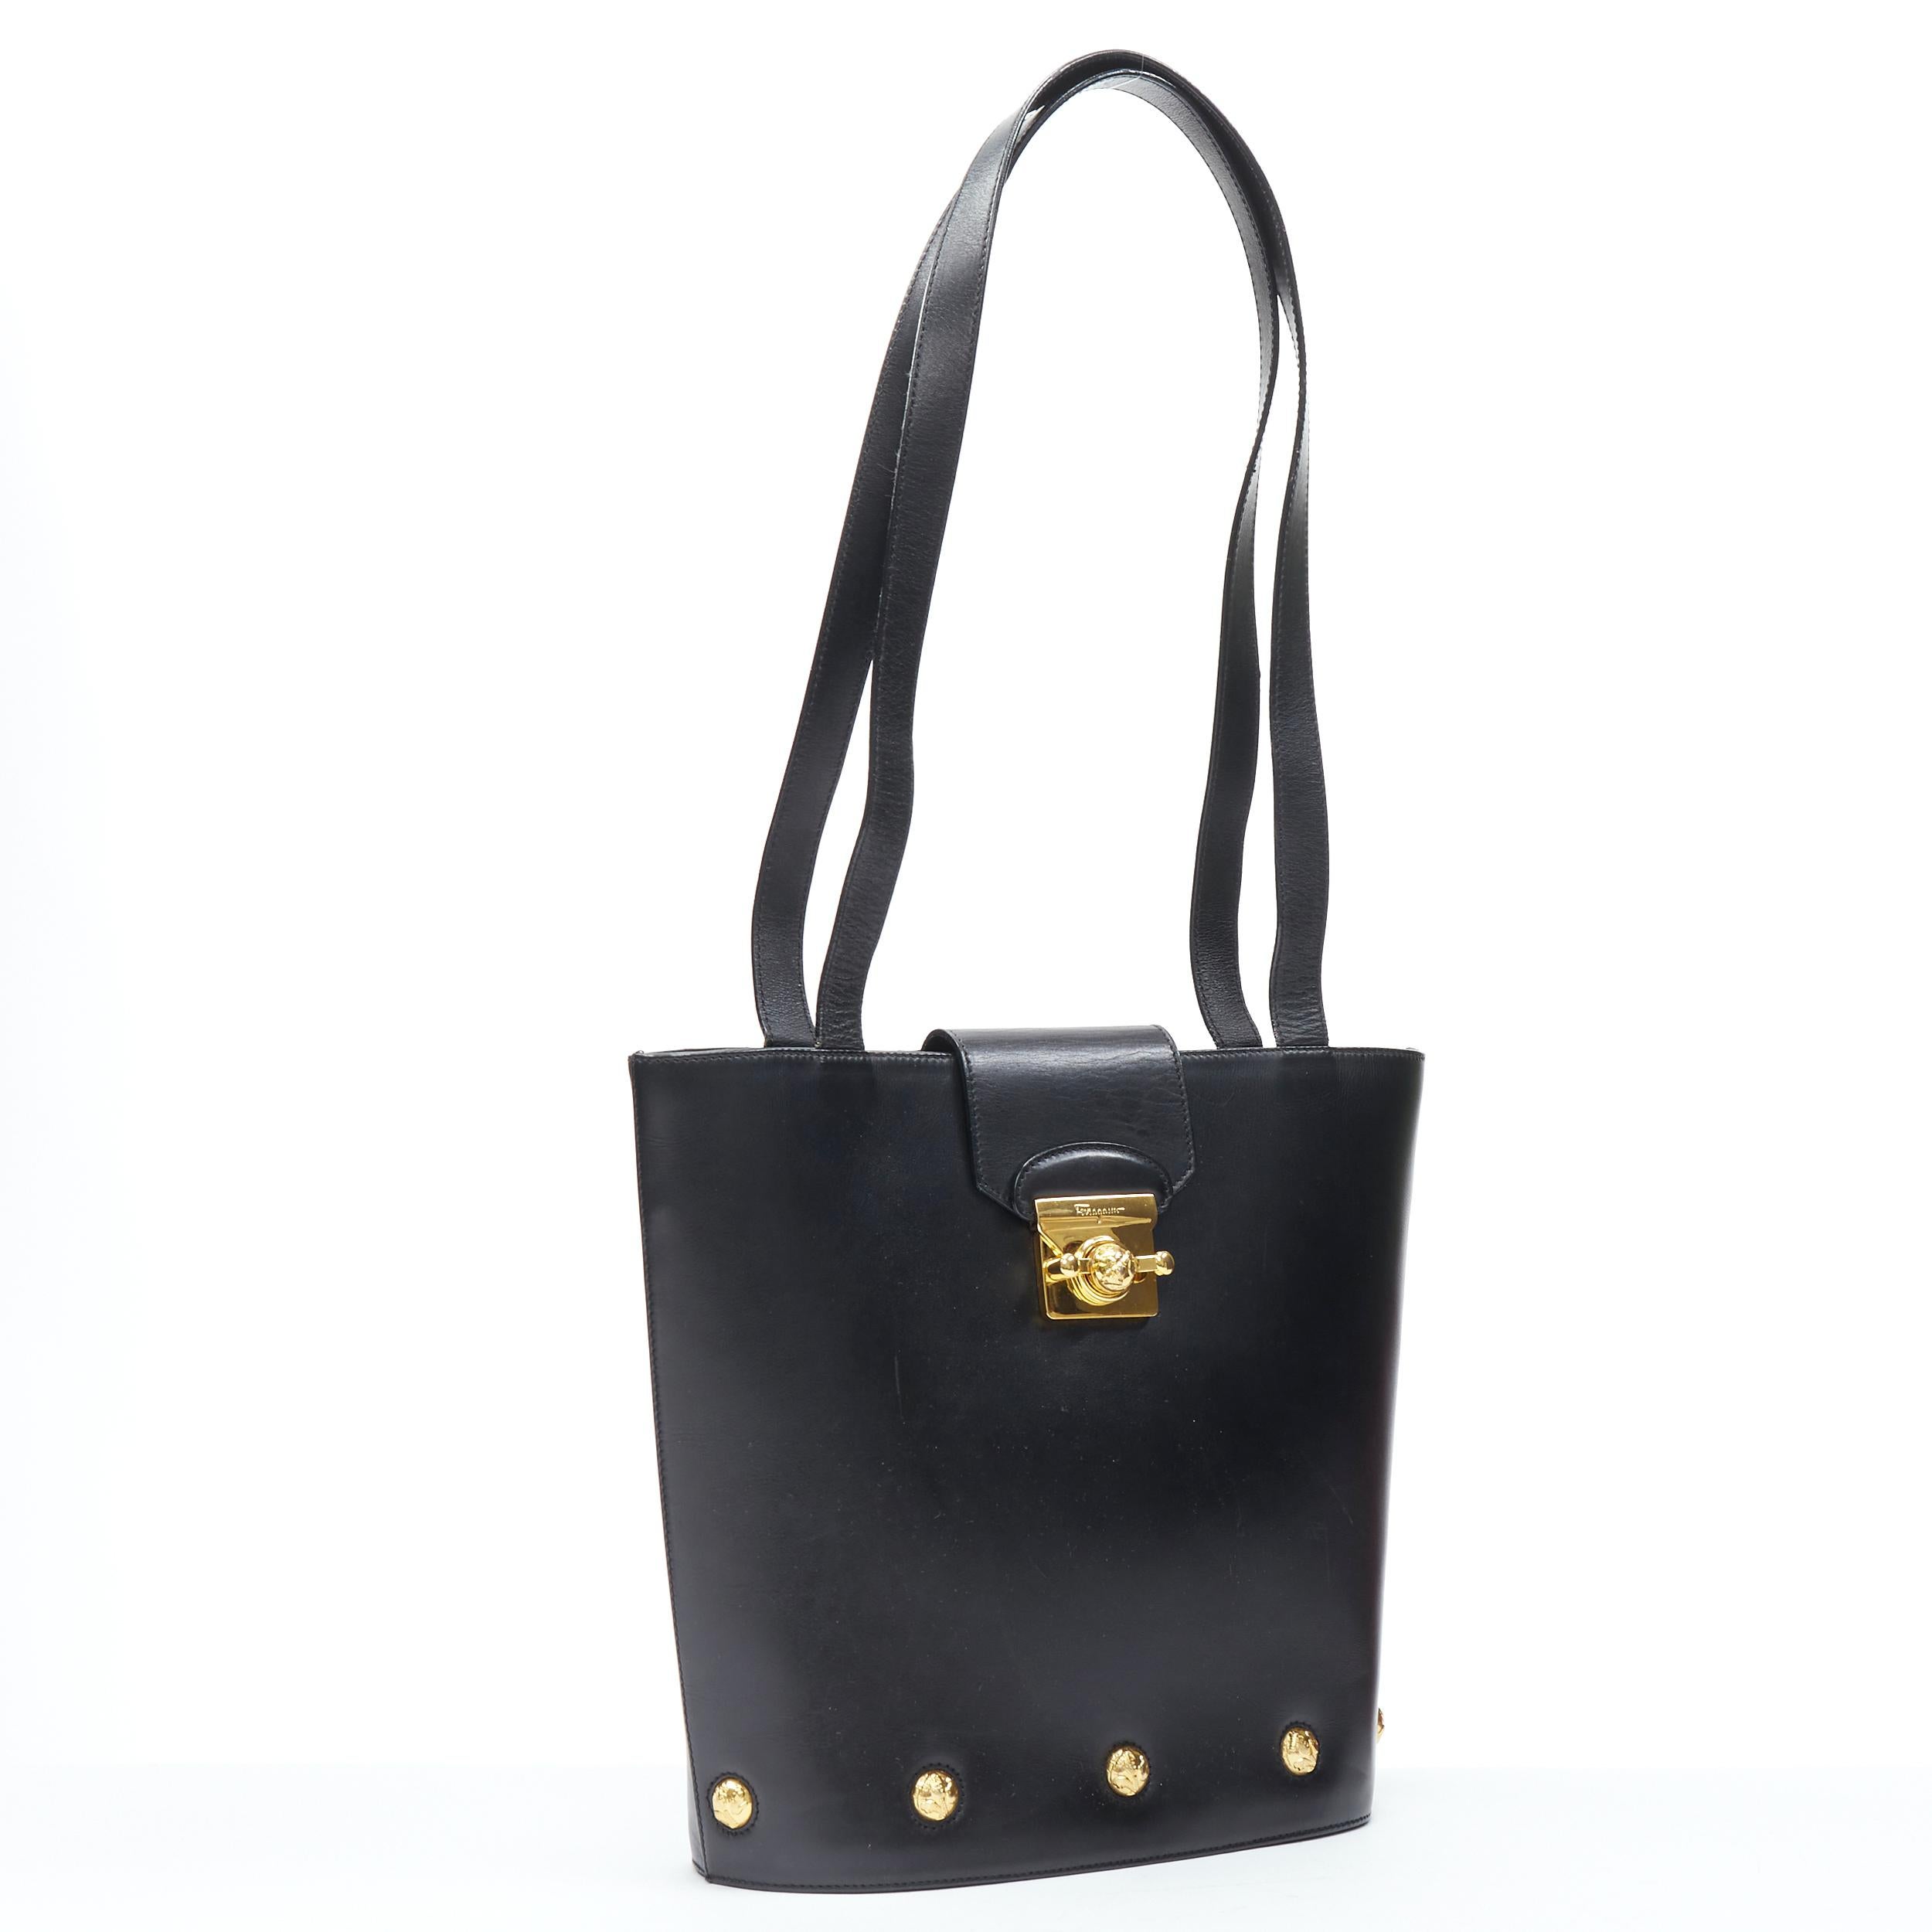 black bag with gold studs